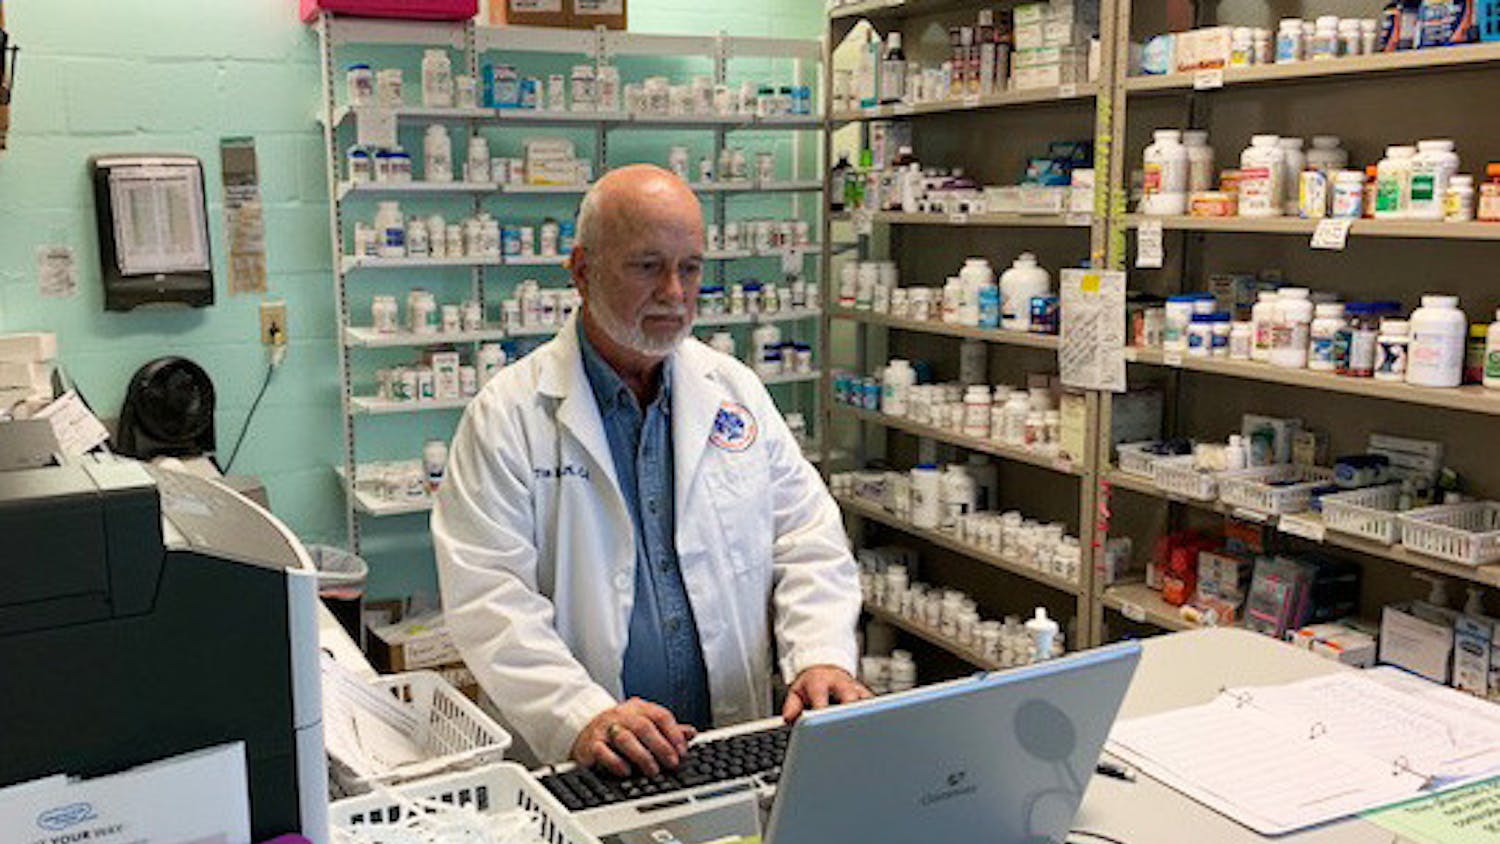 Tim Rogers looks at a computer inside the Grace Pharmacy (Photo courtesy of Lorry Davis, programs administrator for Grace Healthcare Services)
